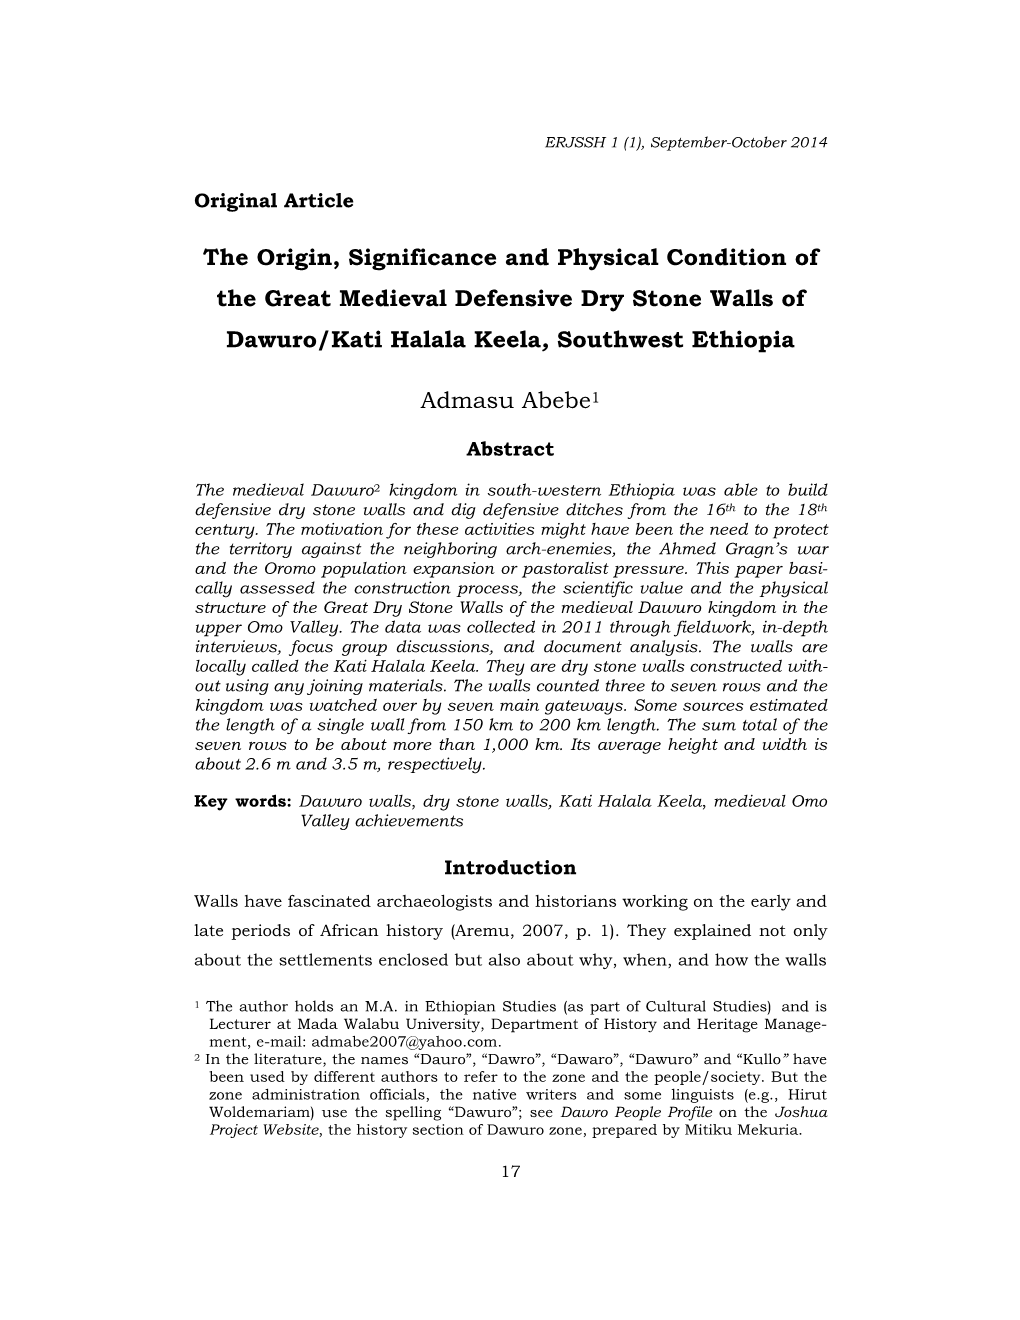 The Origin, Significance and Physical Condition of the Great Medieval Defensive Dry Stone Walls of Dawuro/Kati Halala Keela, Southwest Ethiopia